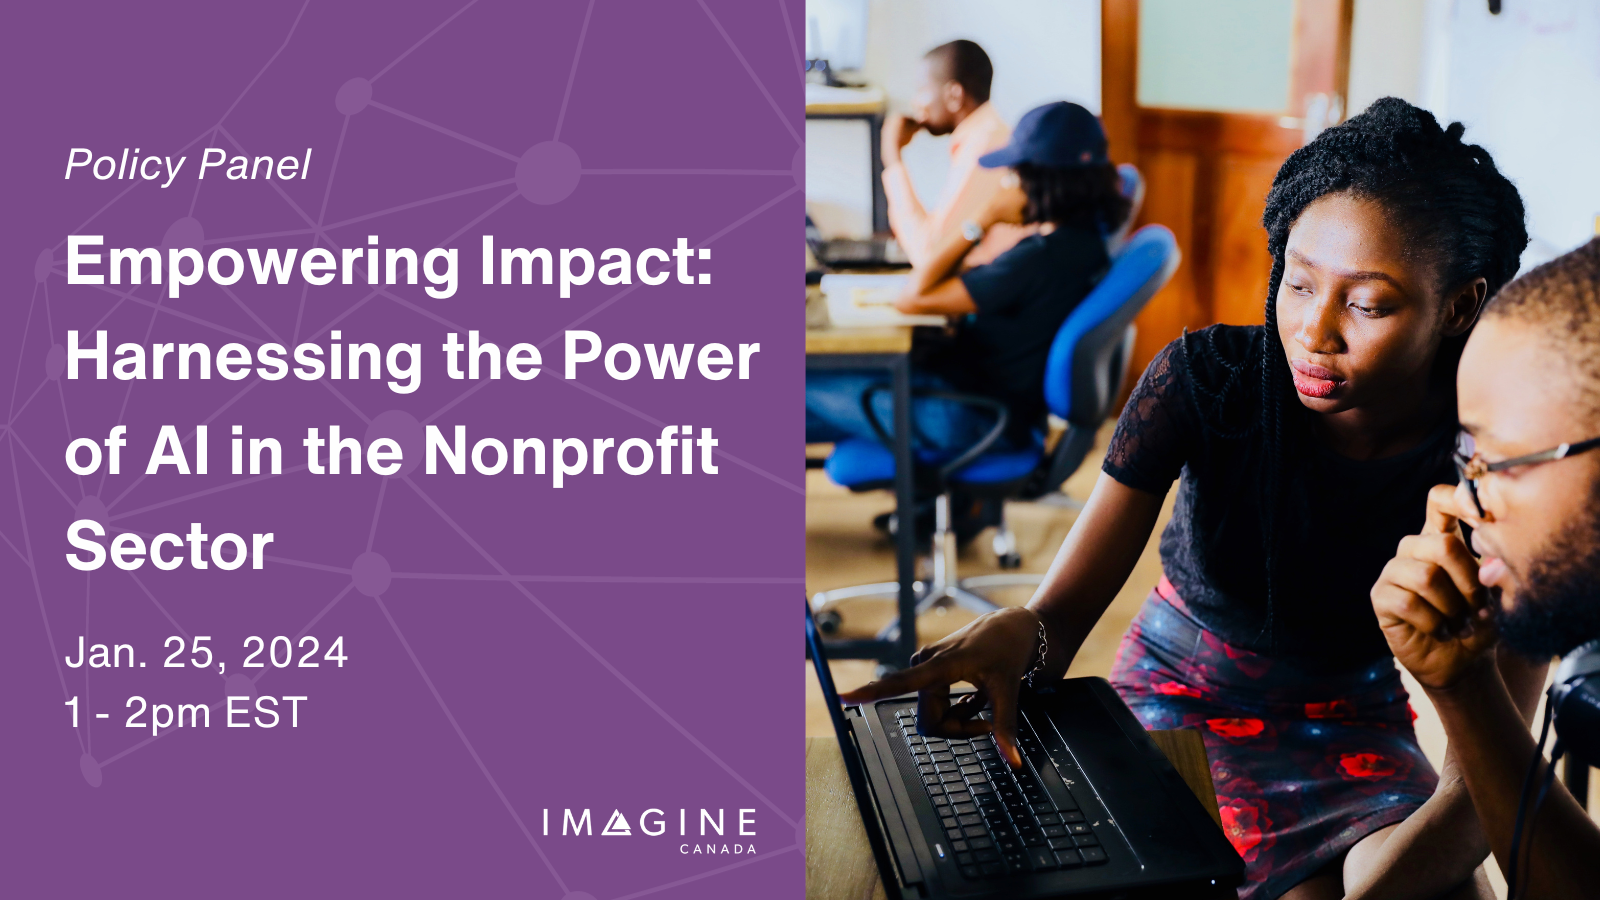 Image: Empowering Impact: Harnessing the Power of AI in the Nonprofit Sector